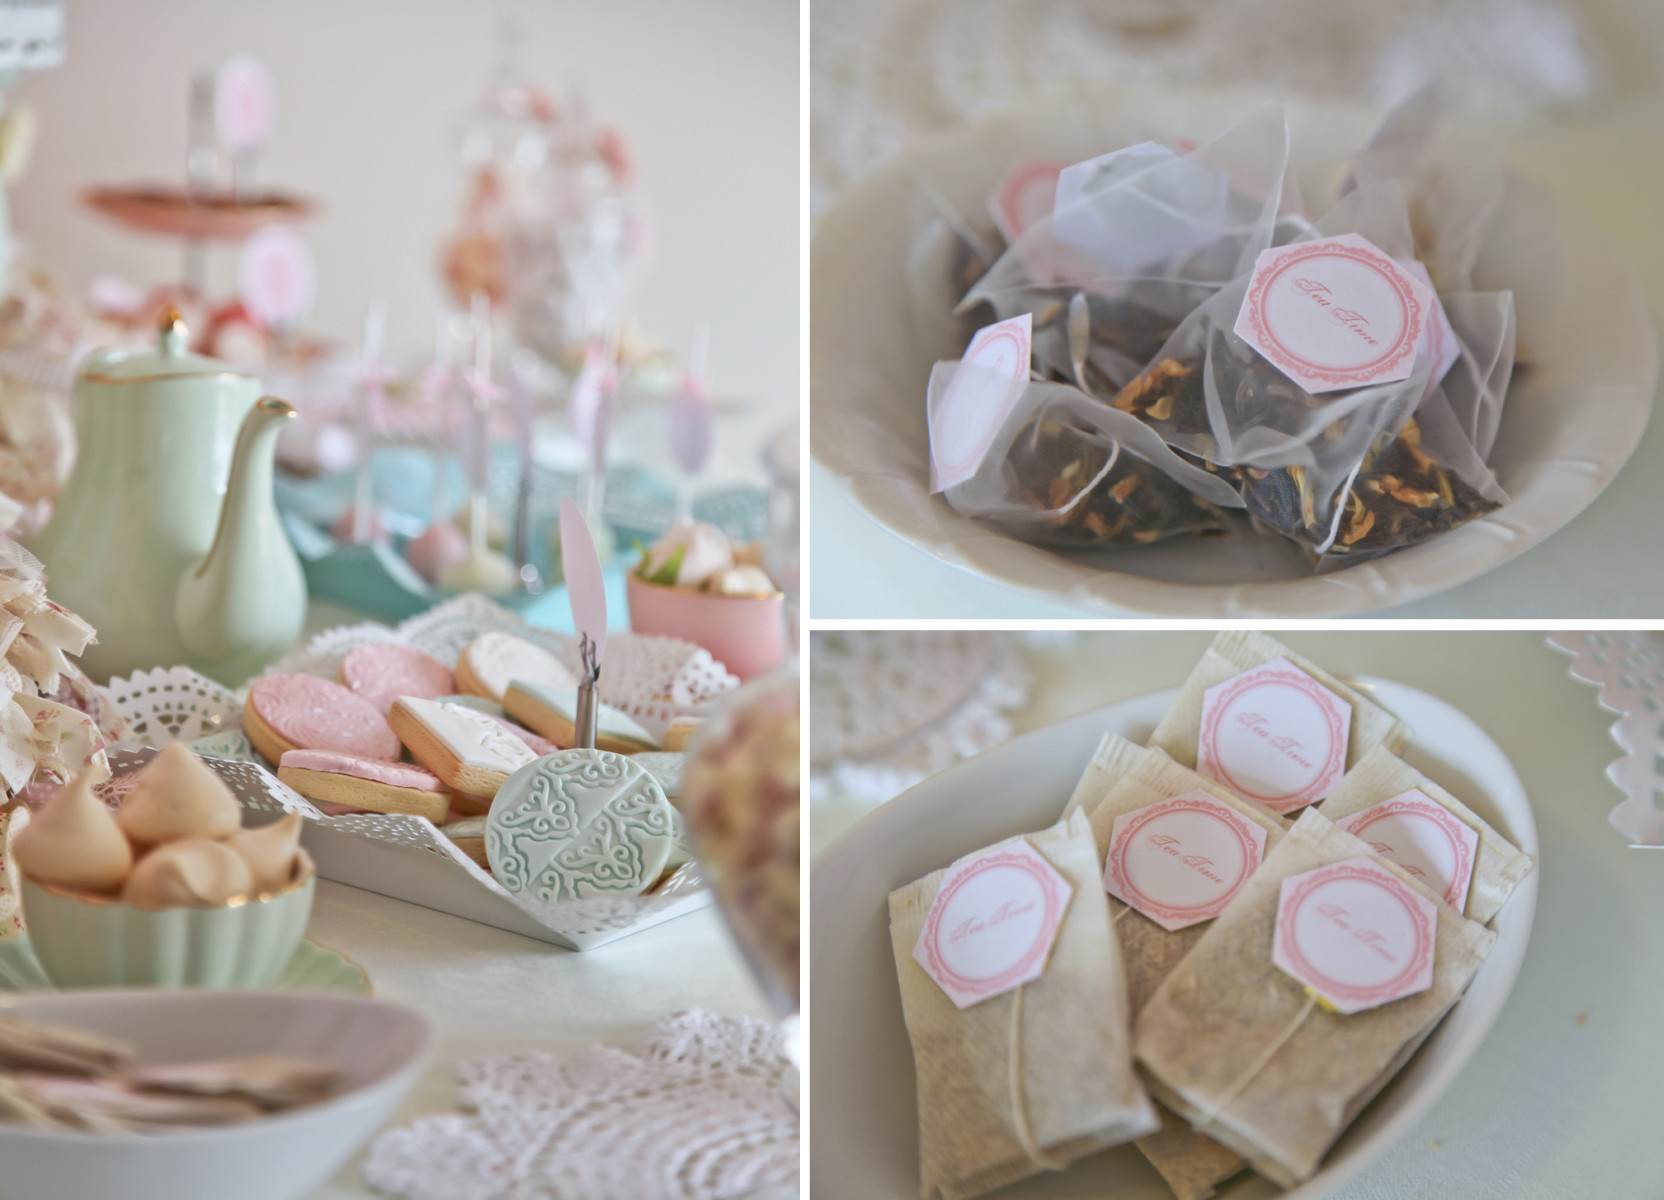 Tea Party Favor Ideas For Adults
 A Stunning Doily Tea Party by Kiss With Style Anders